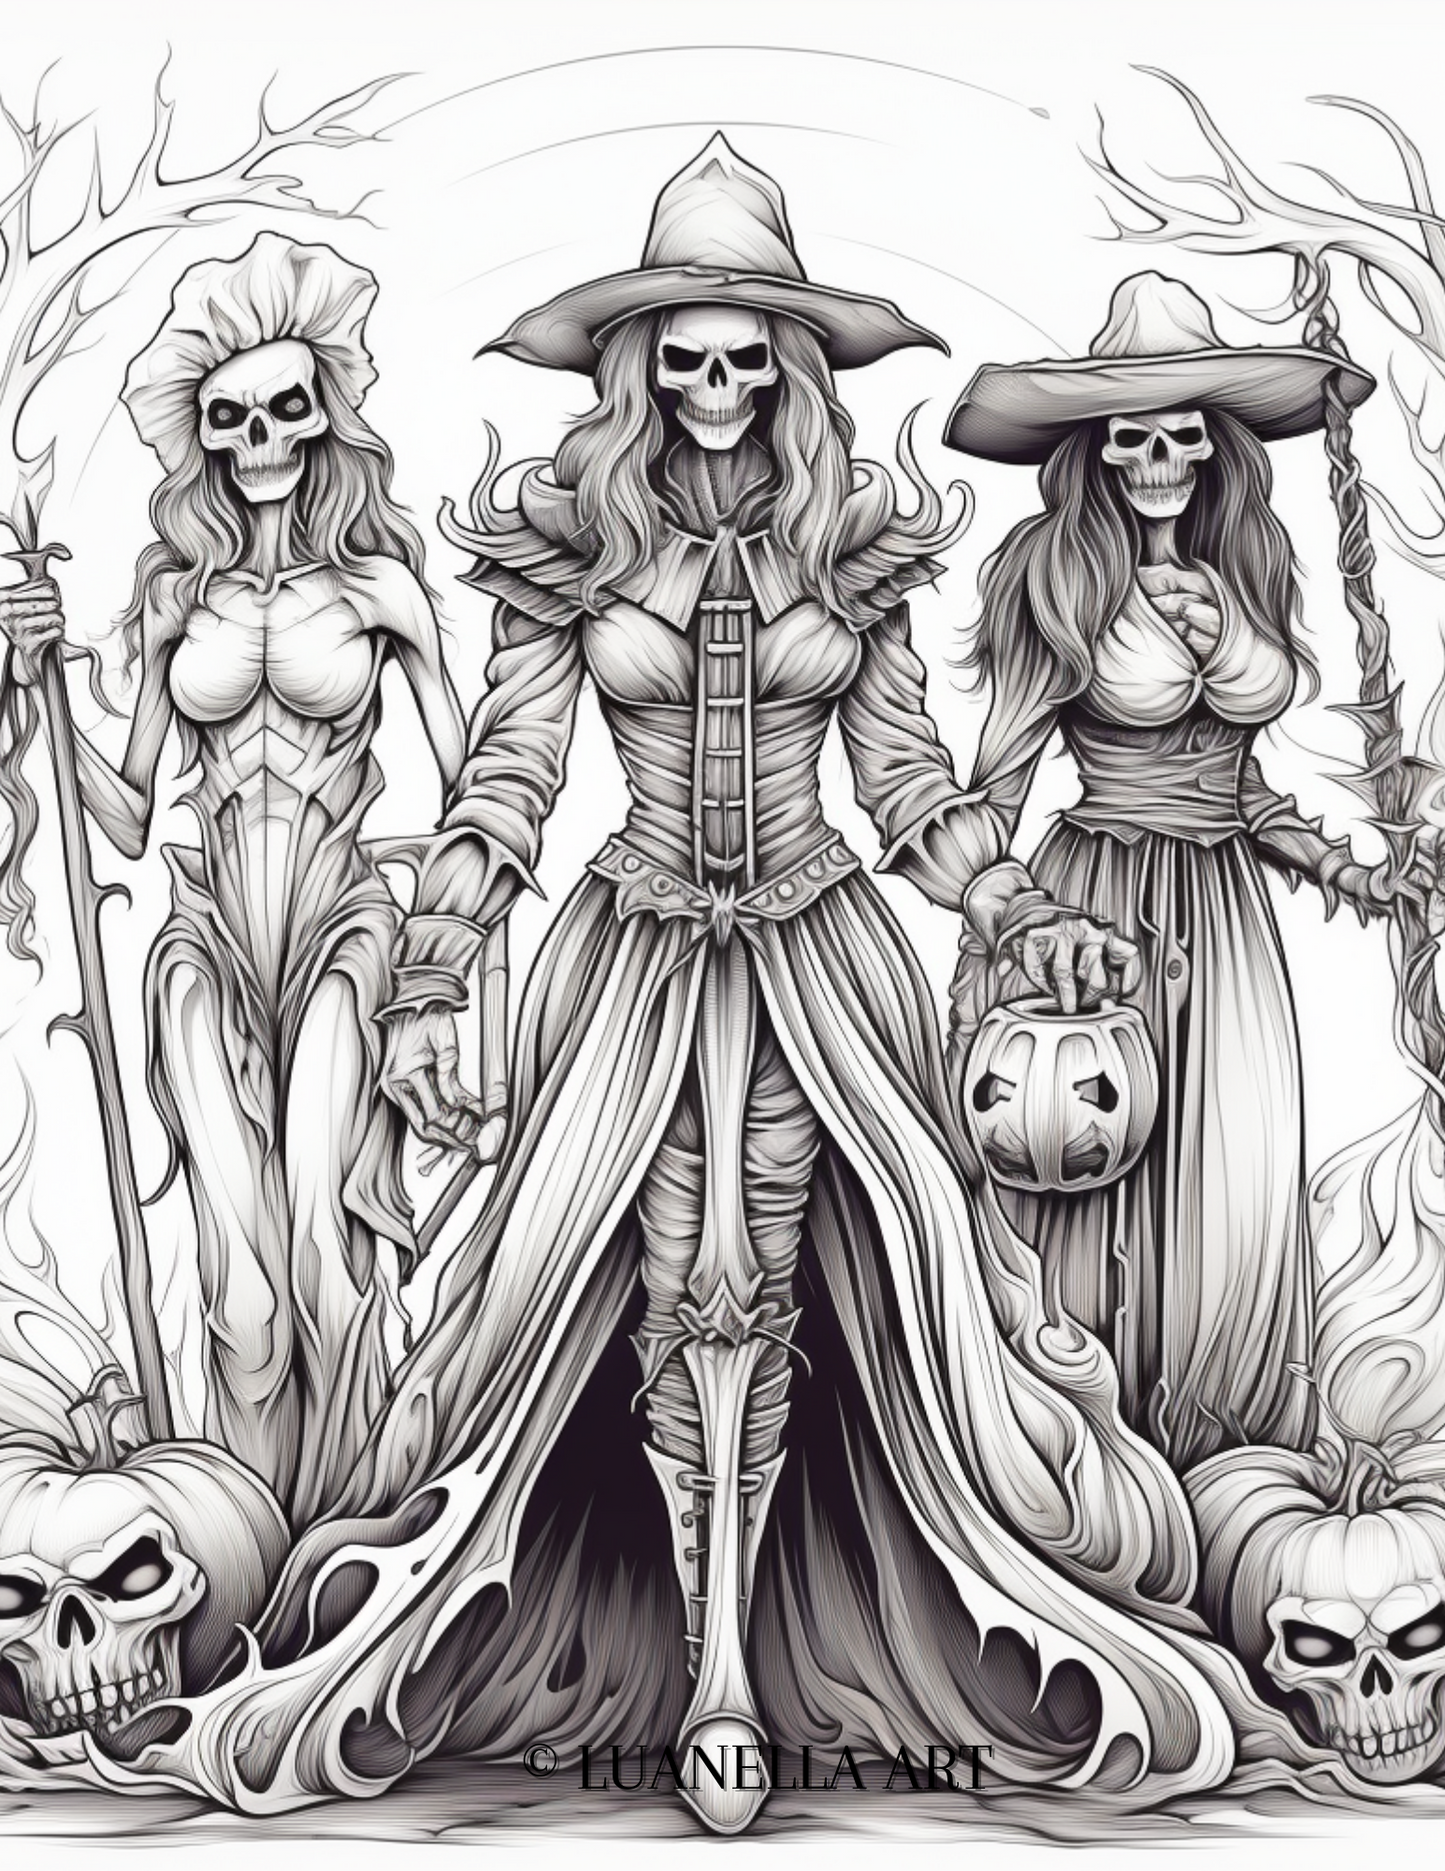 Scary Skeleton Witchy Witches | Coloring Page | Instant Digital Download